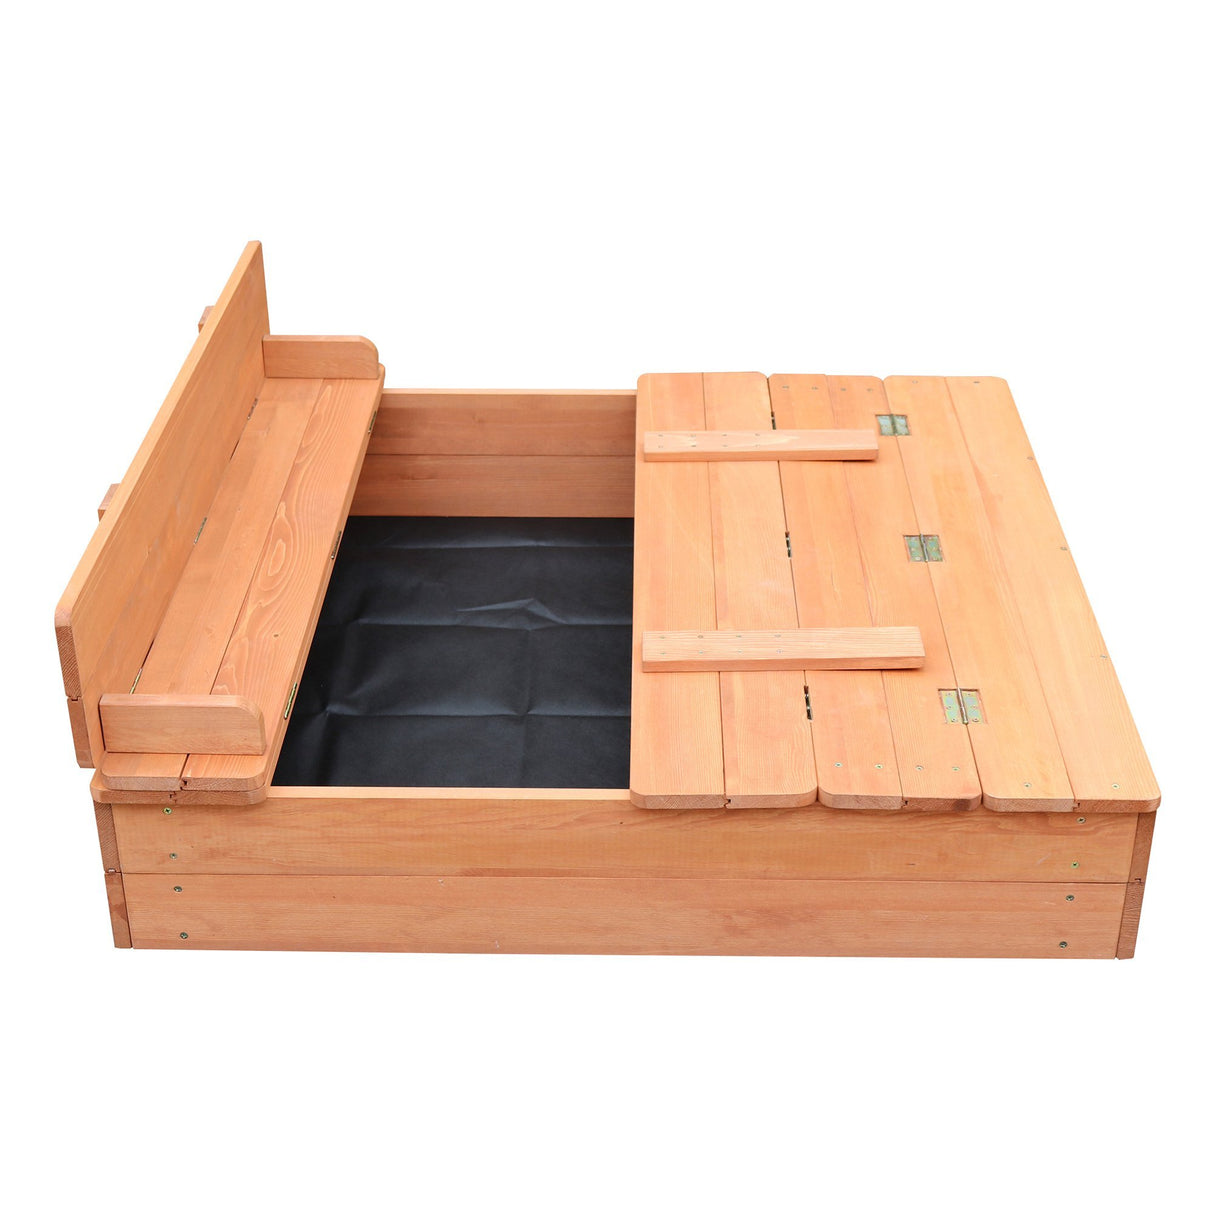 Sandpit with Seating - Liberty House Toys - Junior Bambinos